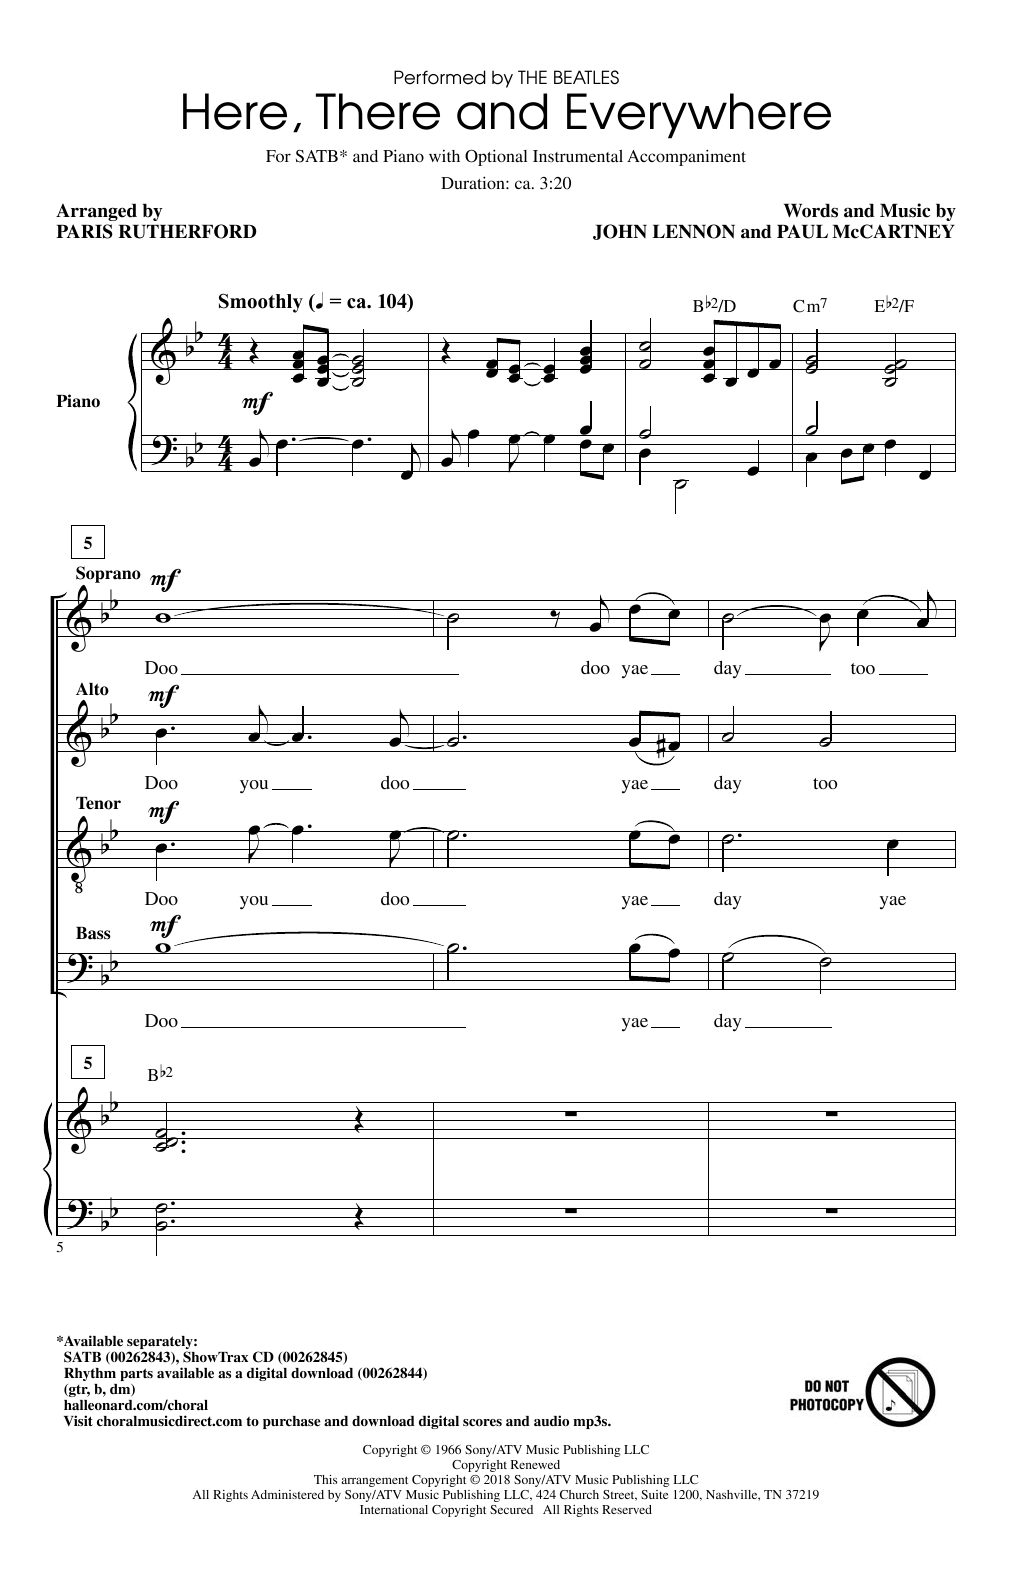 Download Paris Rutherford Here, There And Everywhere Sheet Music